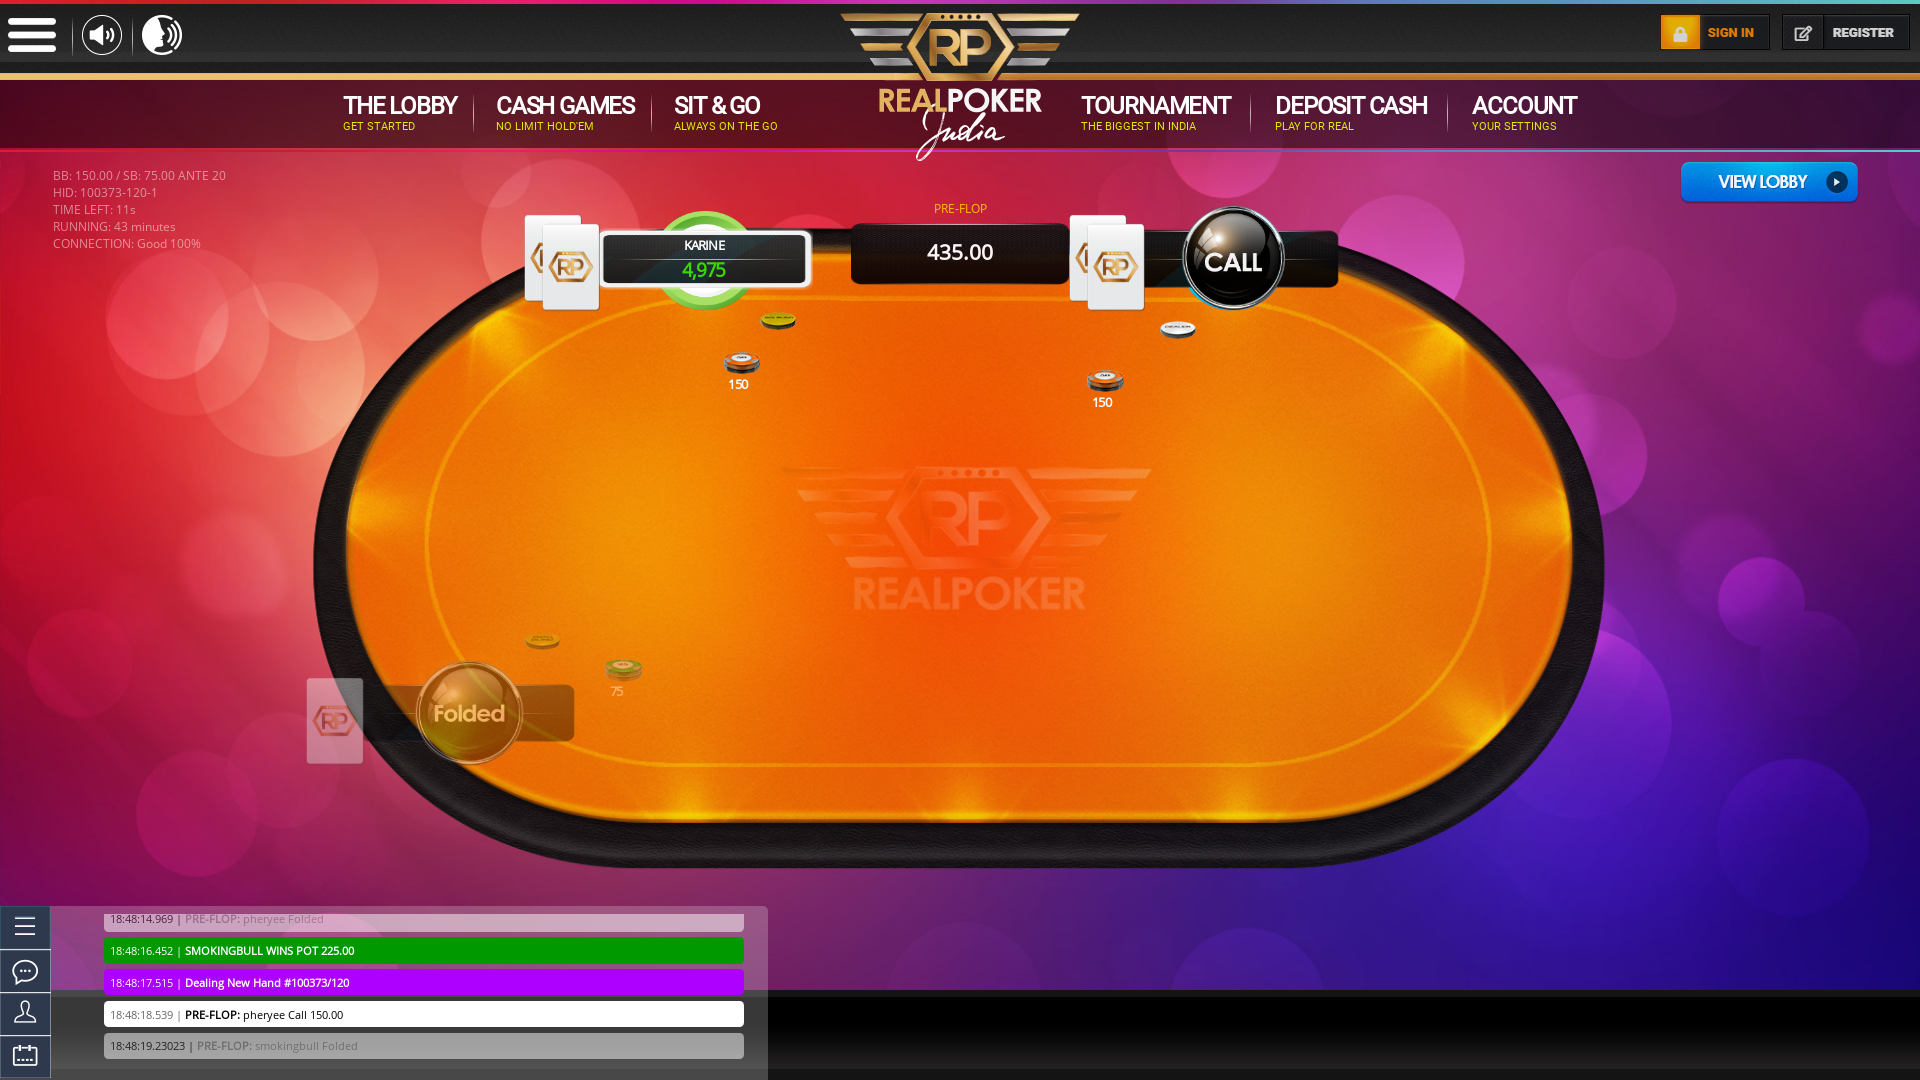 Online poker on a 10 player table in the 43rd minute match up